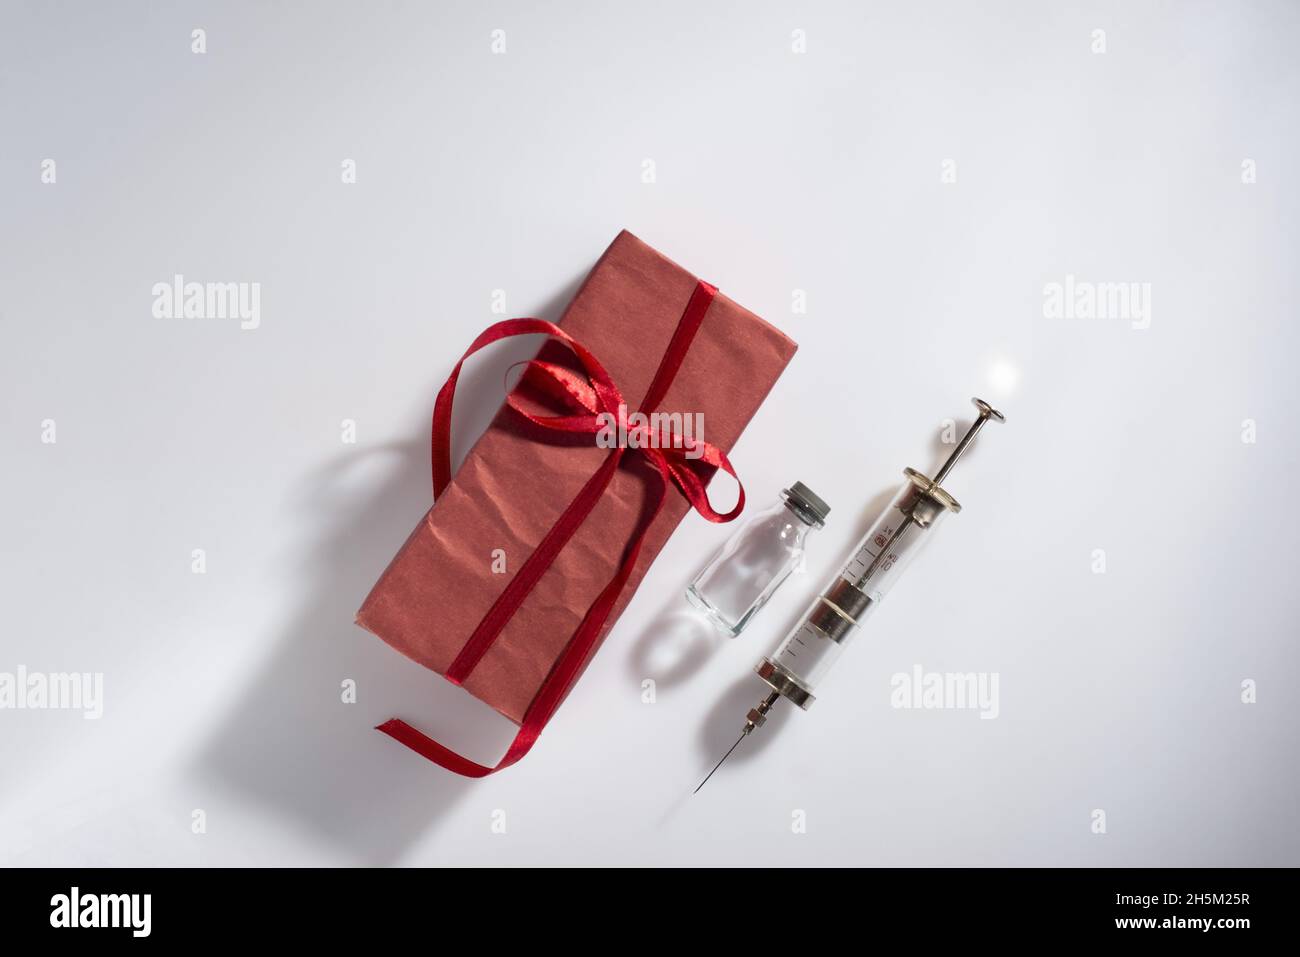 red vaccine gift with syringe on white background Creative Coronavirus or 2019-nCoV or COVID-19 vaccine Stock Photo